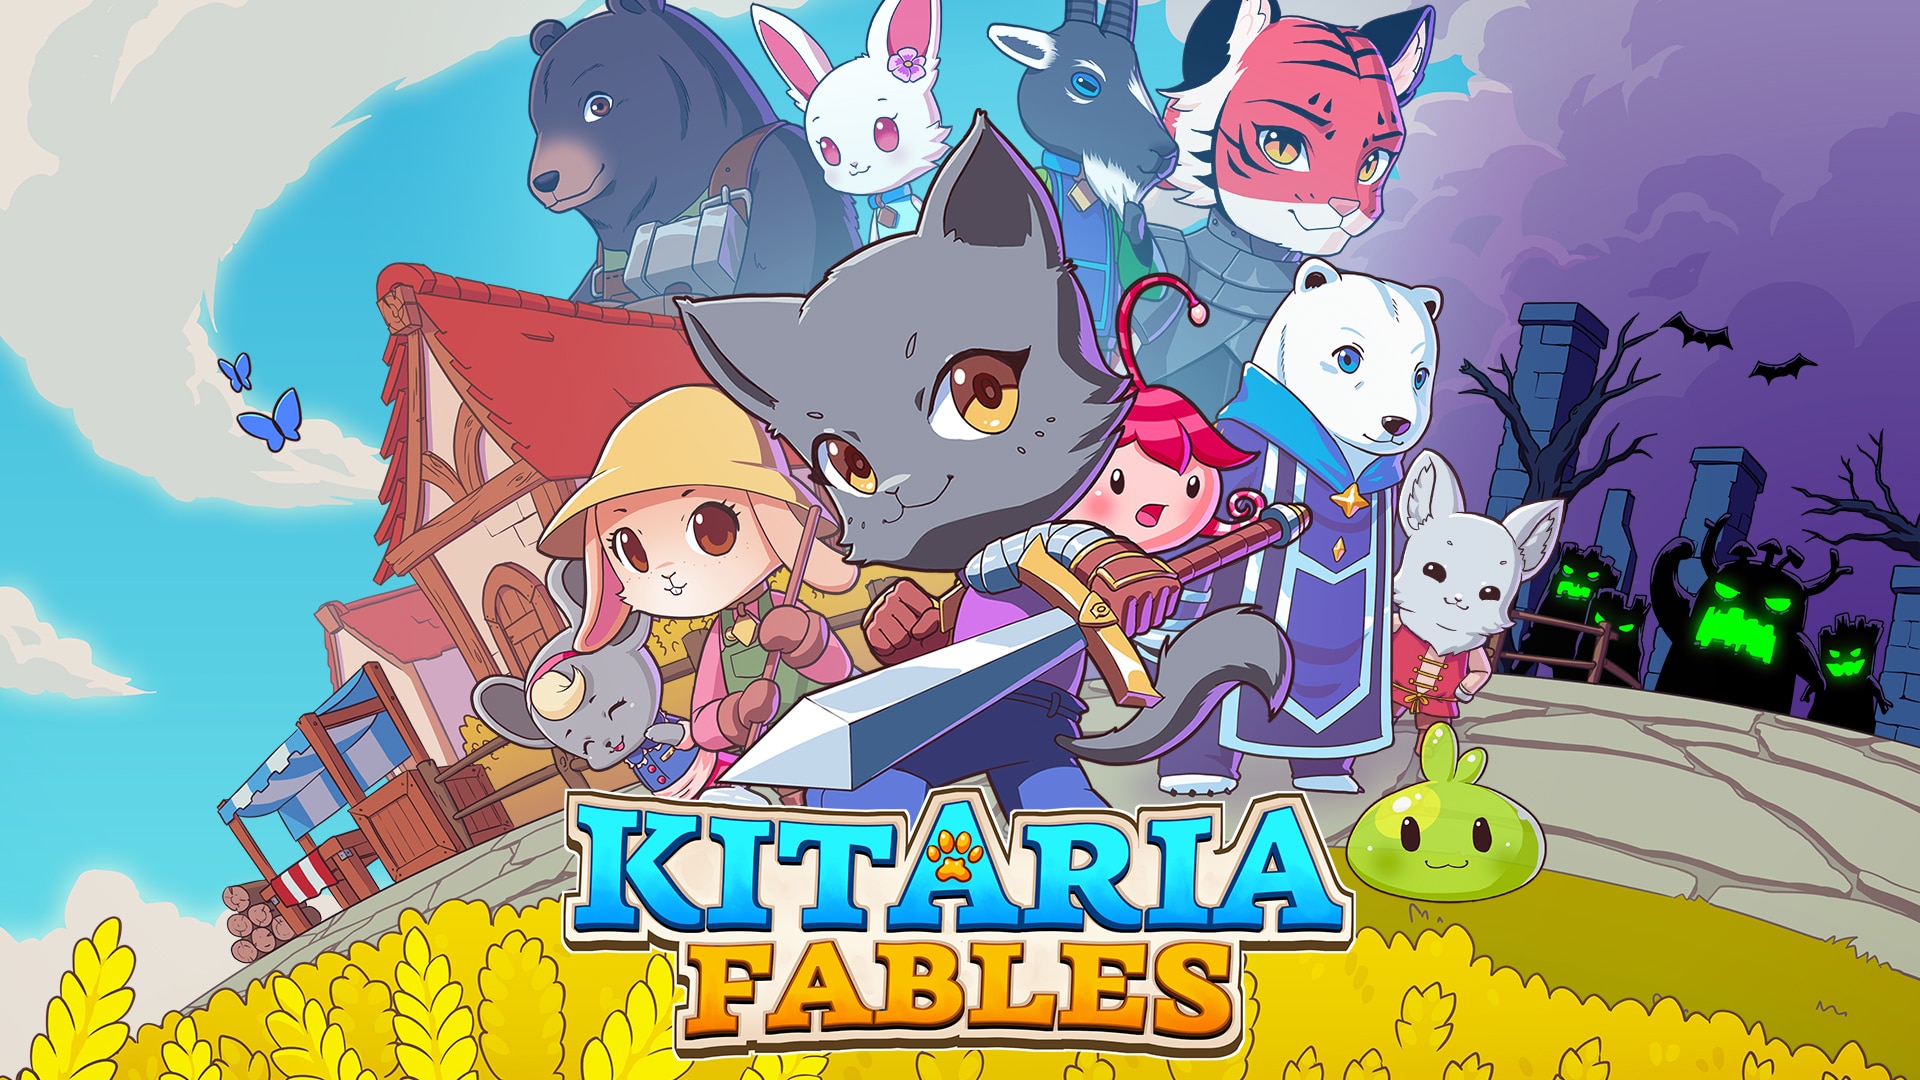 Cat-Adventure RPG ‘Kitaria Fables’ Gets September Release Date and Physical Version